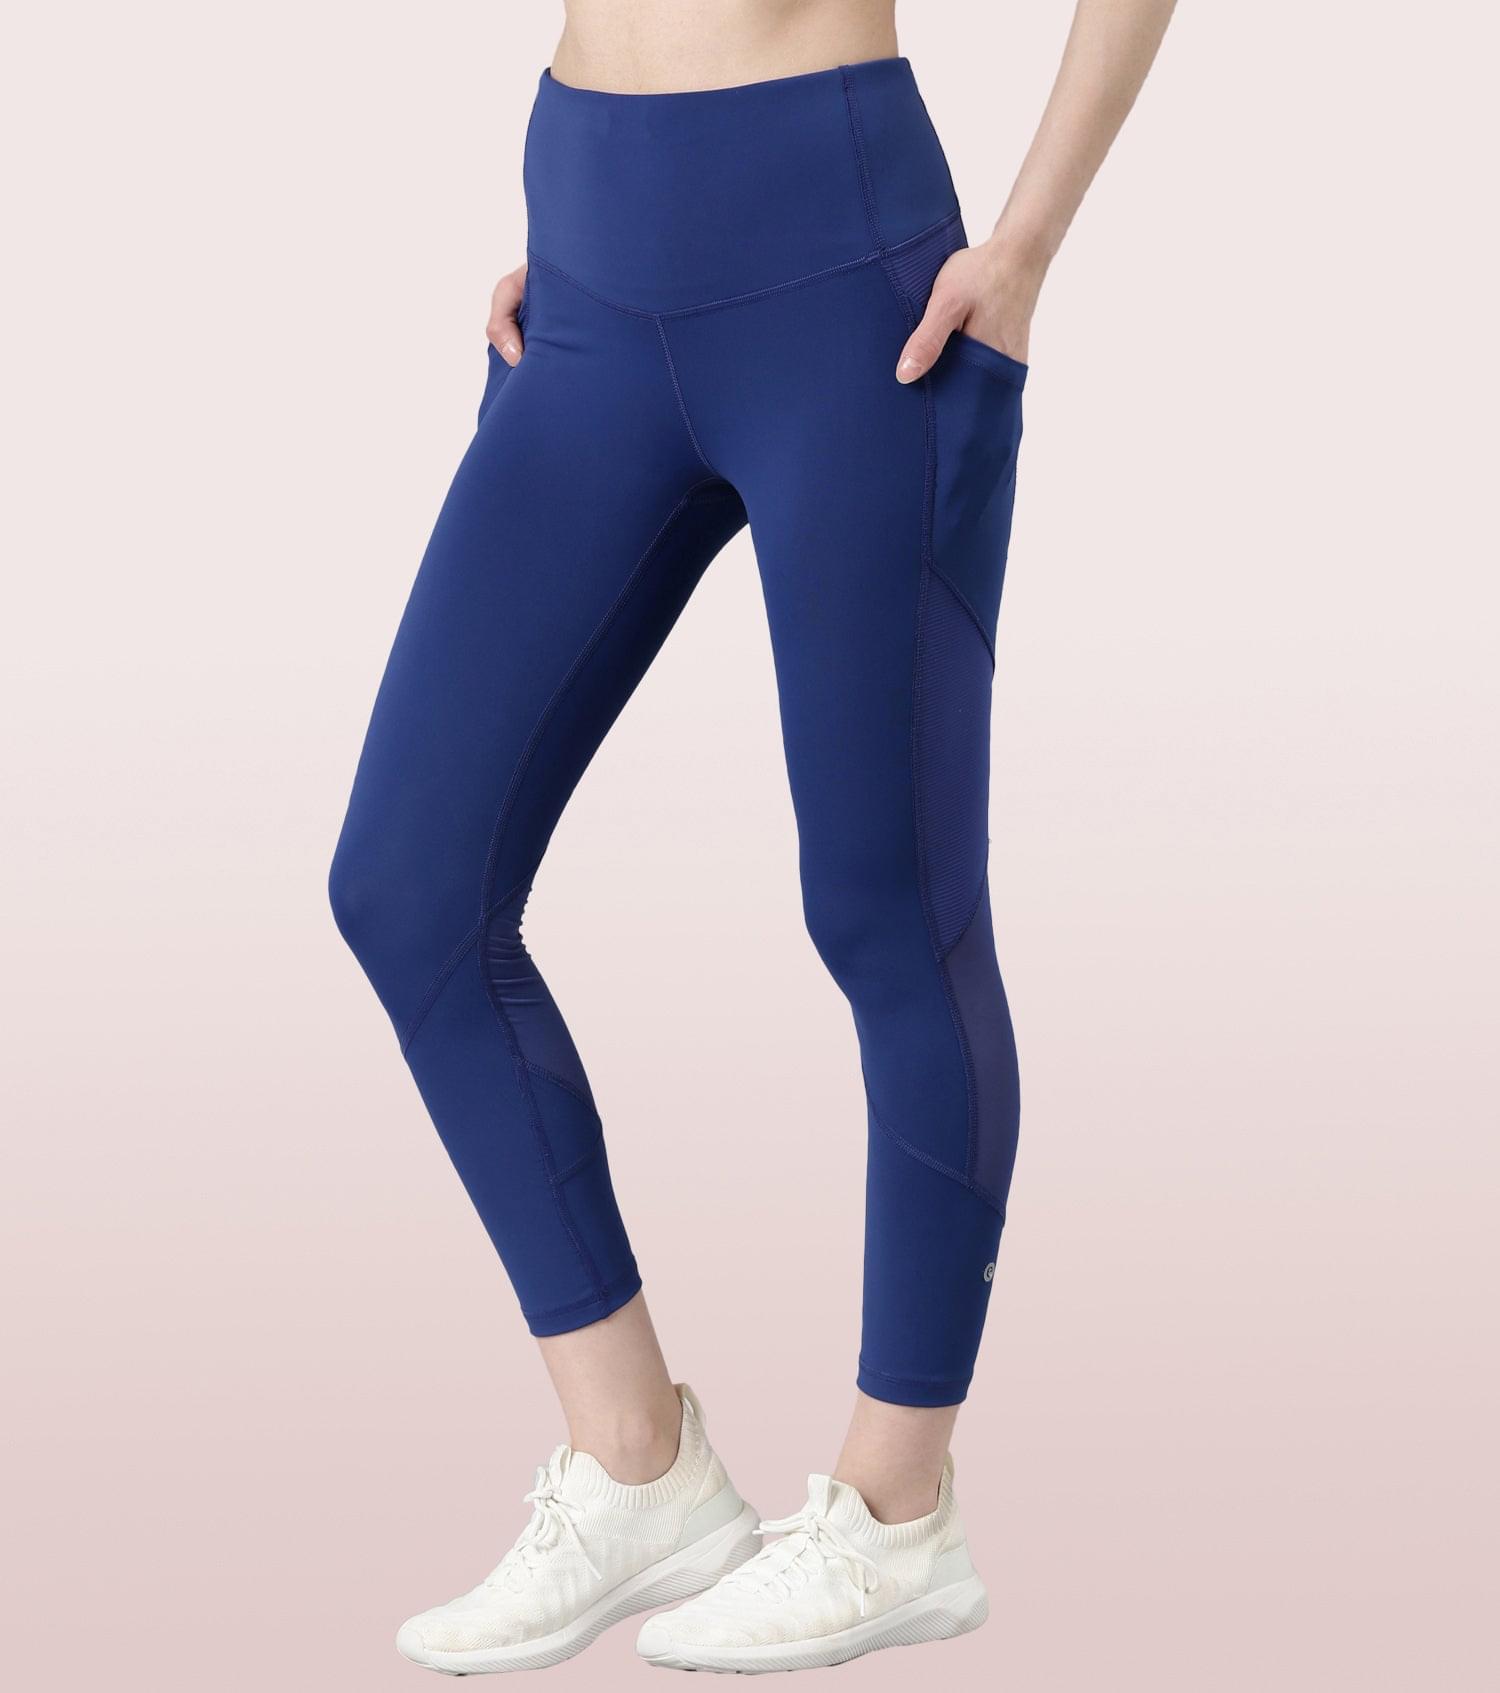 Blue Butterfly Leggings With Pockets Quick Dry, Aesthetic, Push Up